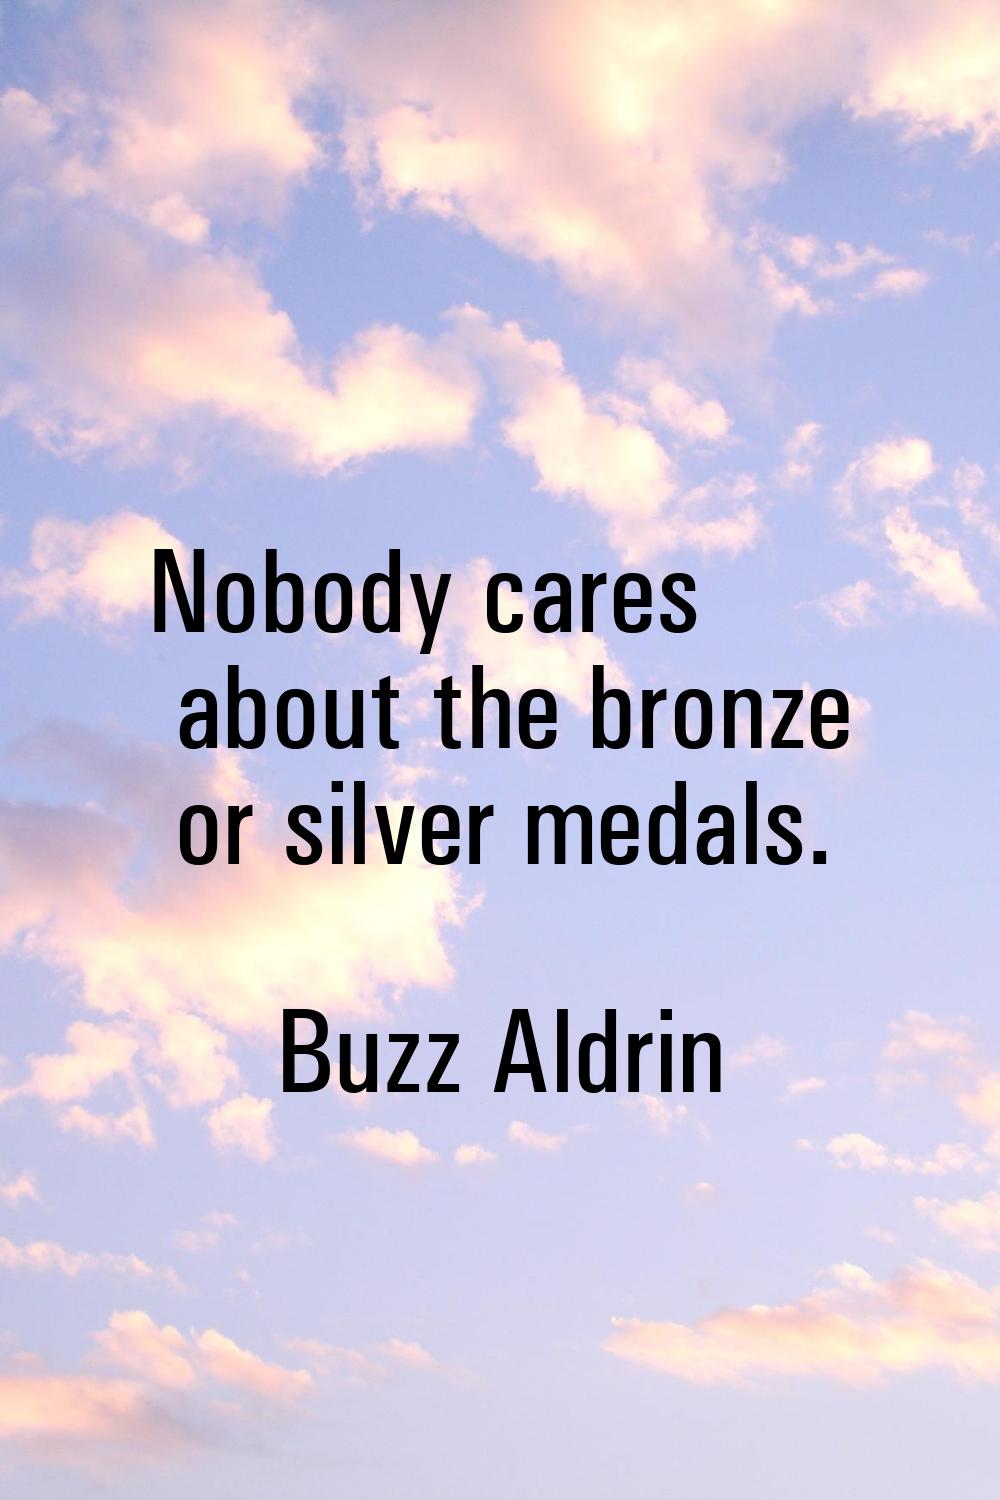 Nobody cares about the bronze or silver medals.